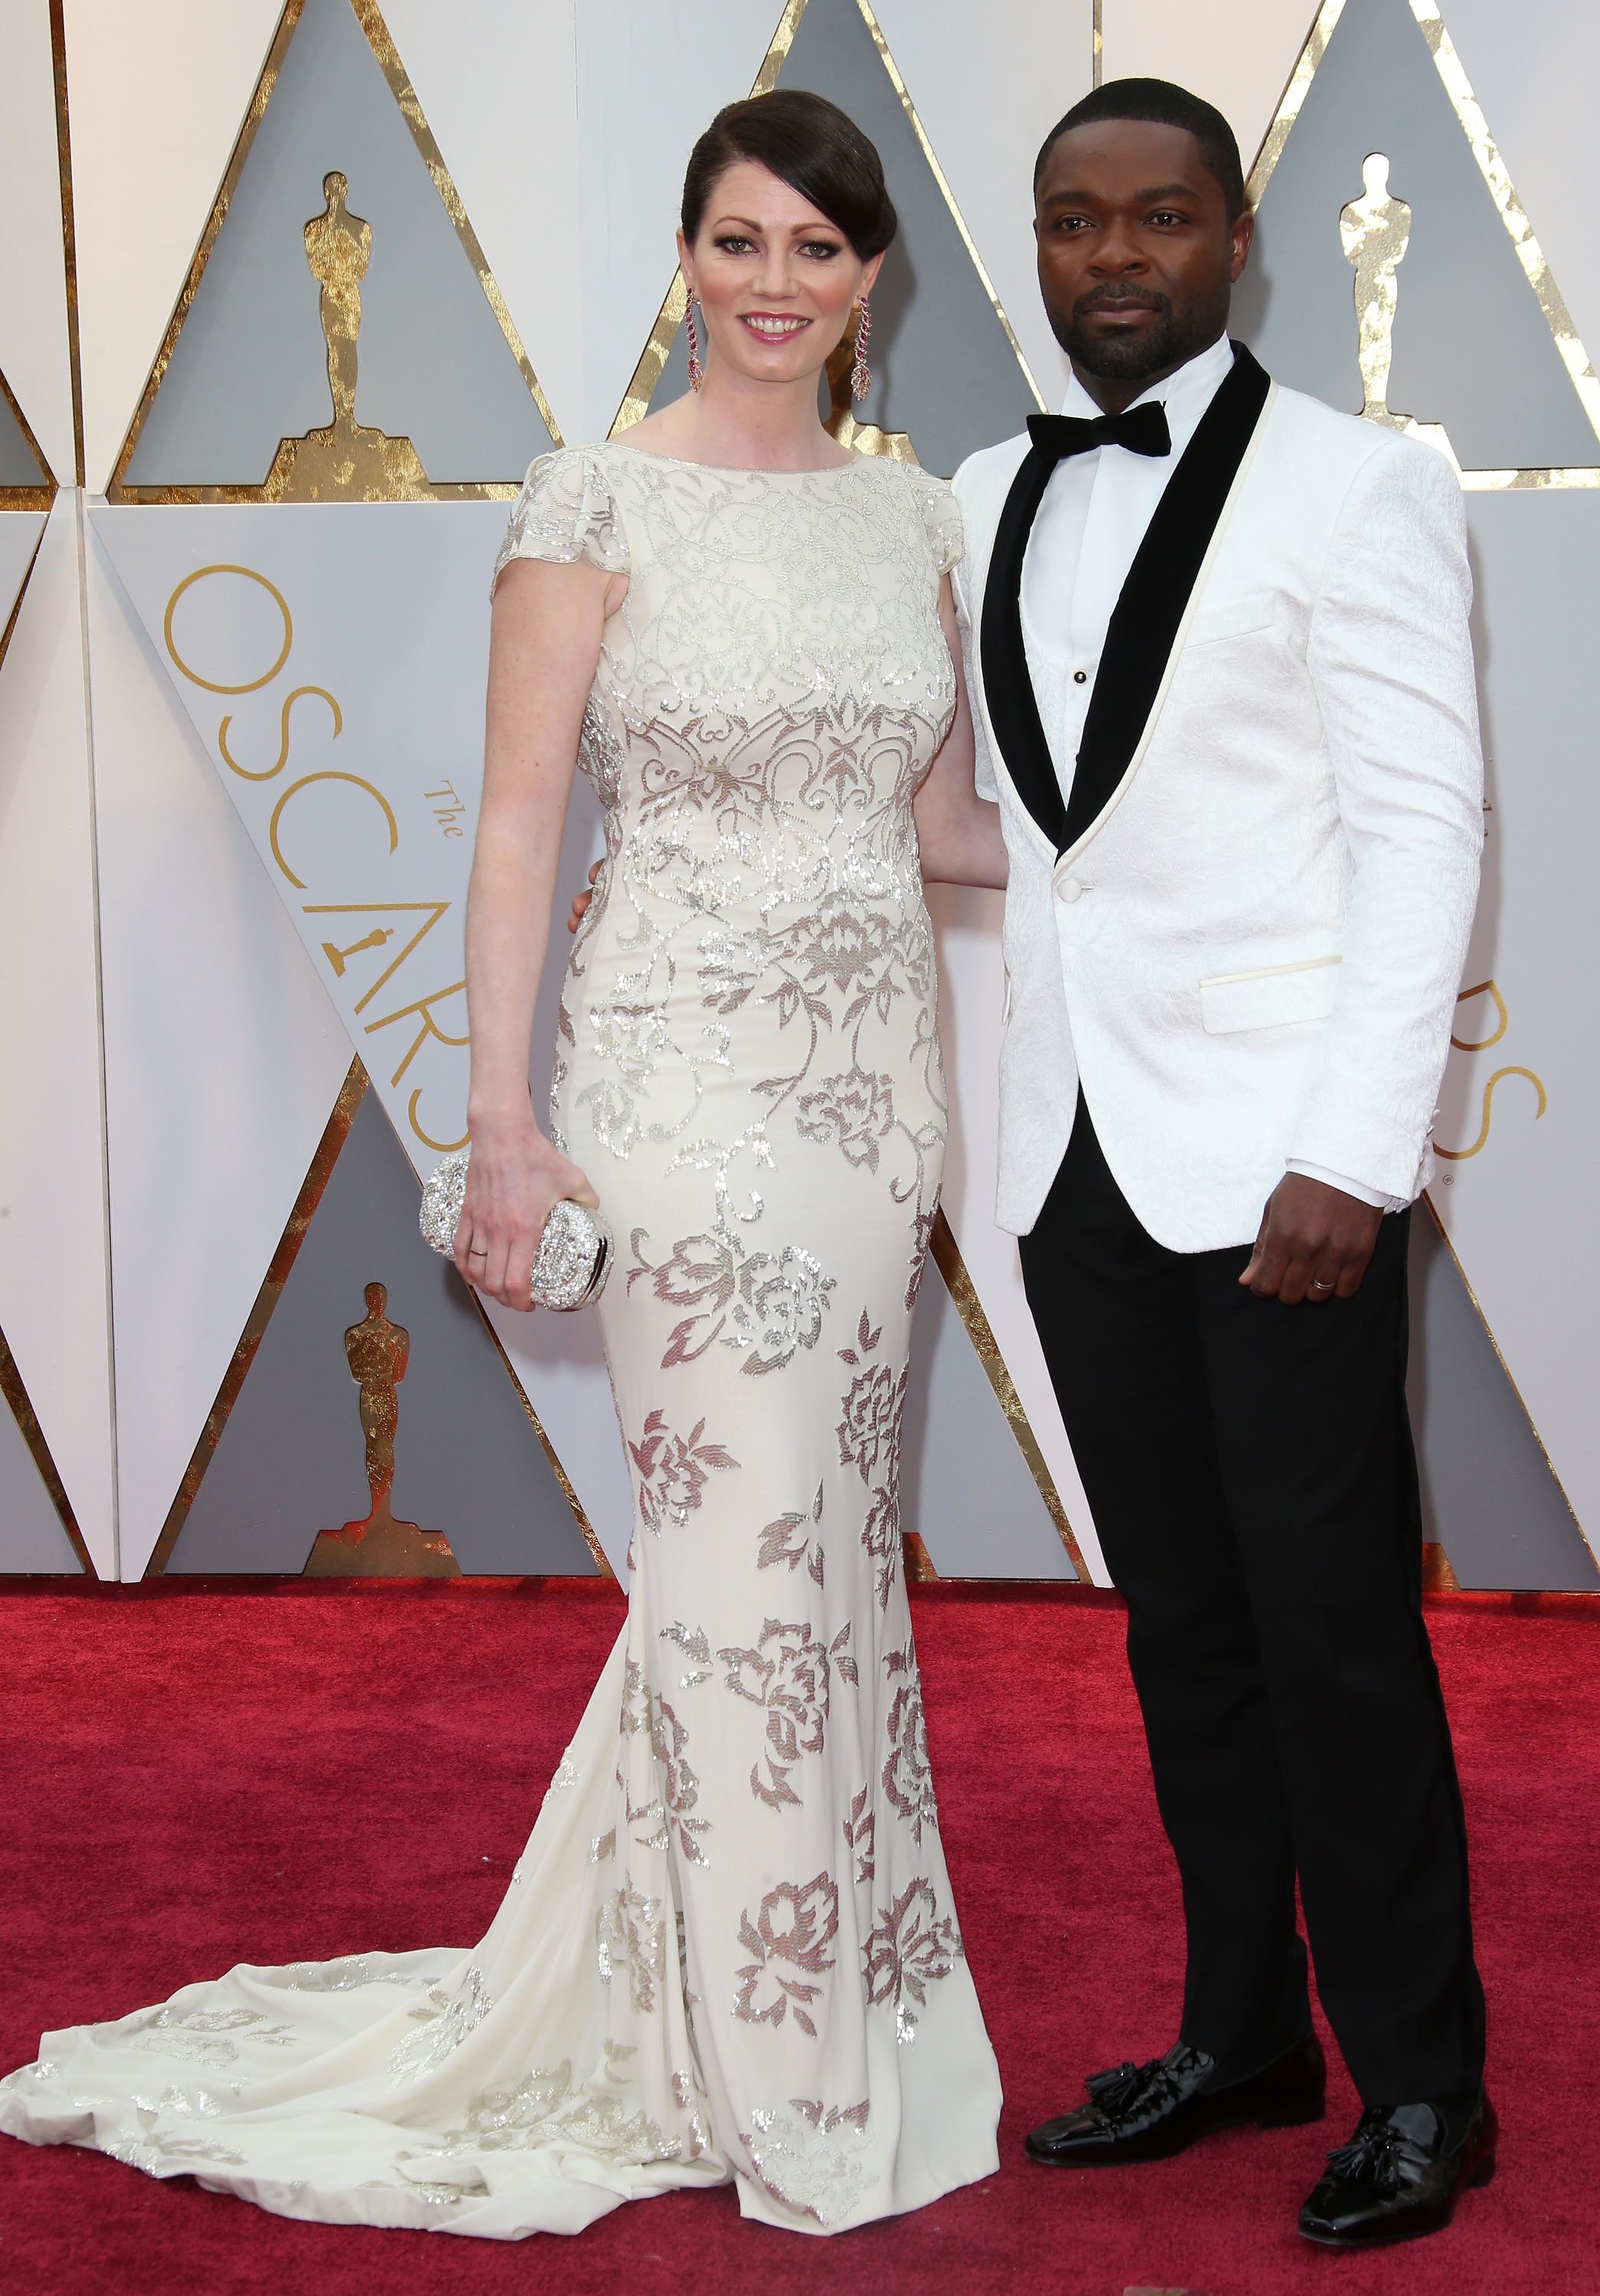 Jessica and David Oyelowo at the 89th Annual Academy Awards on February 26, 2017, in Hollywood, California. | Source: Getty Images